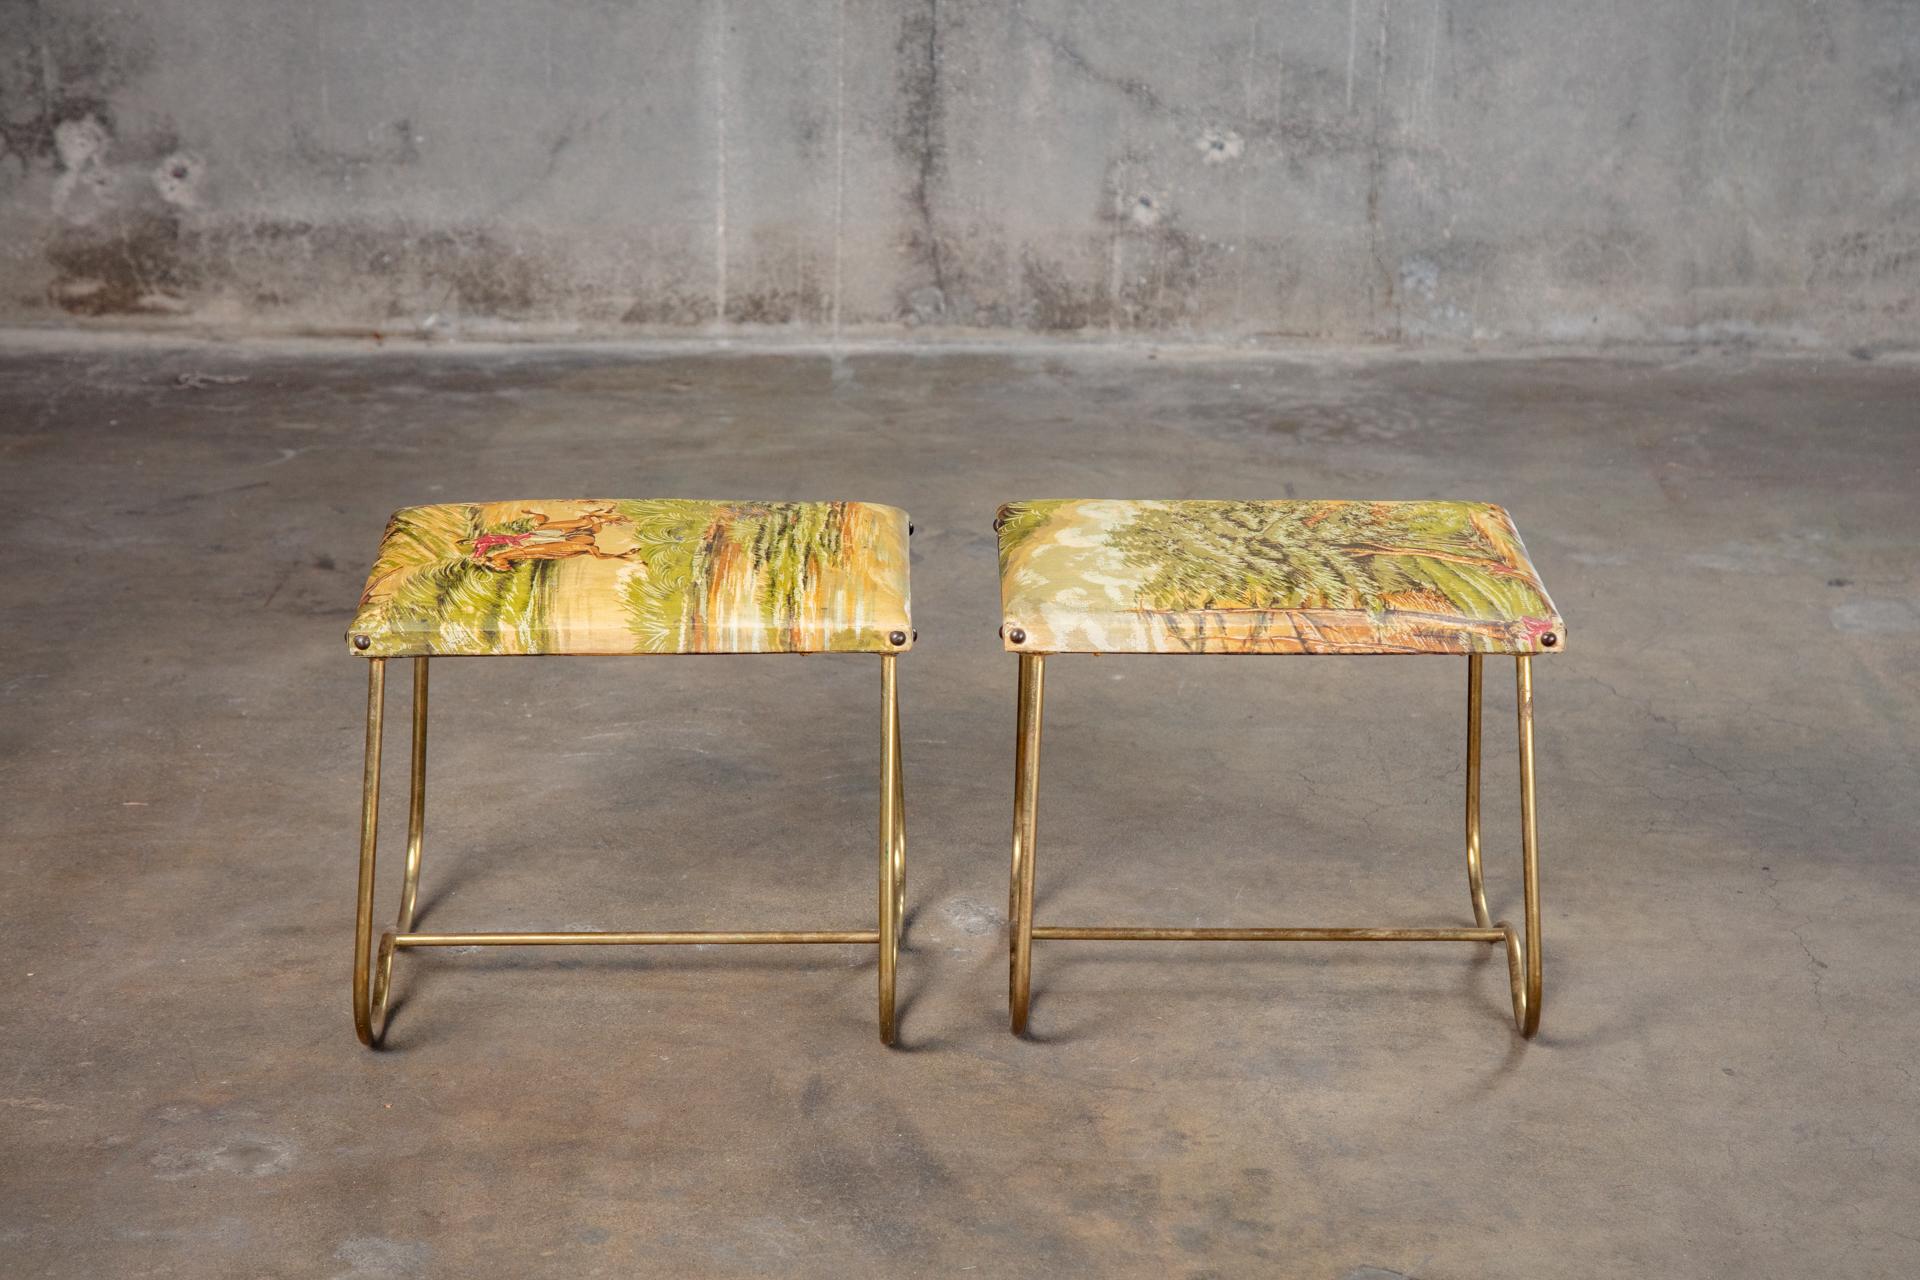 20th Century Pair of Midcentury Italian Brass Benches with Equestrian Themed Upholstery